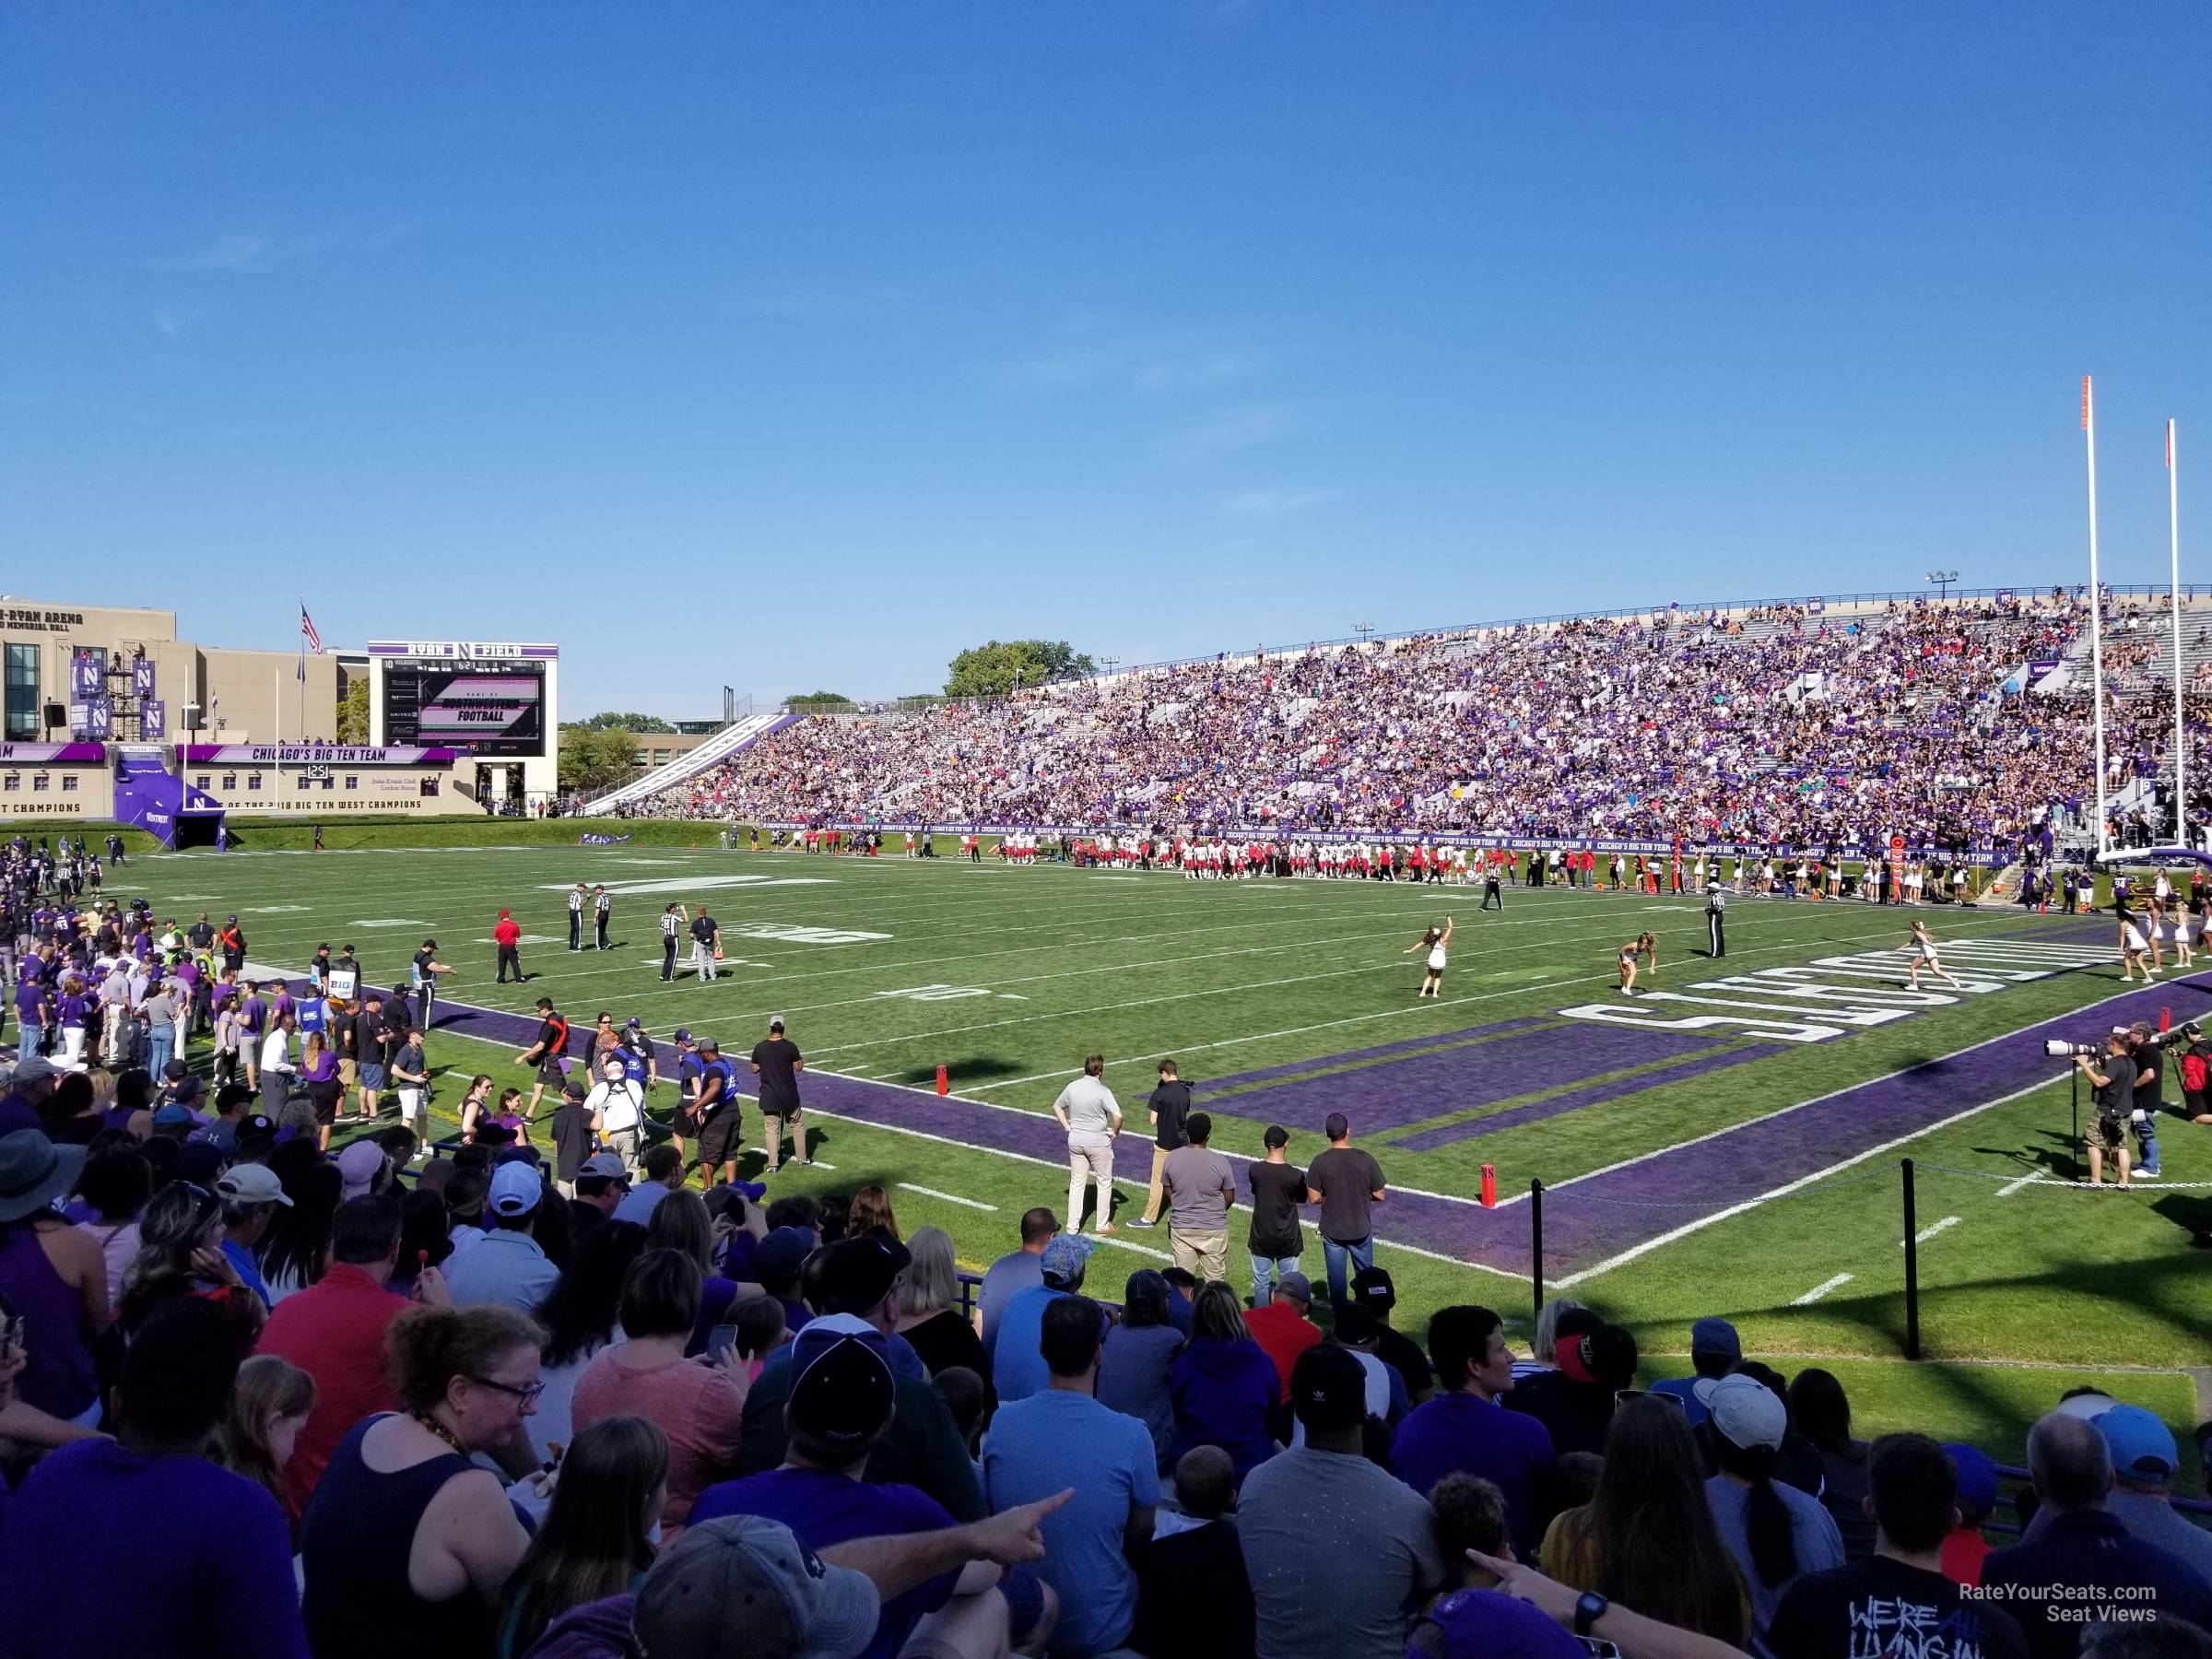 section 124, row 11 seat view  - ryan field